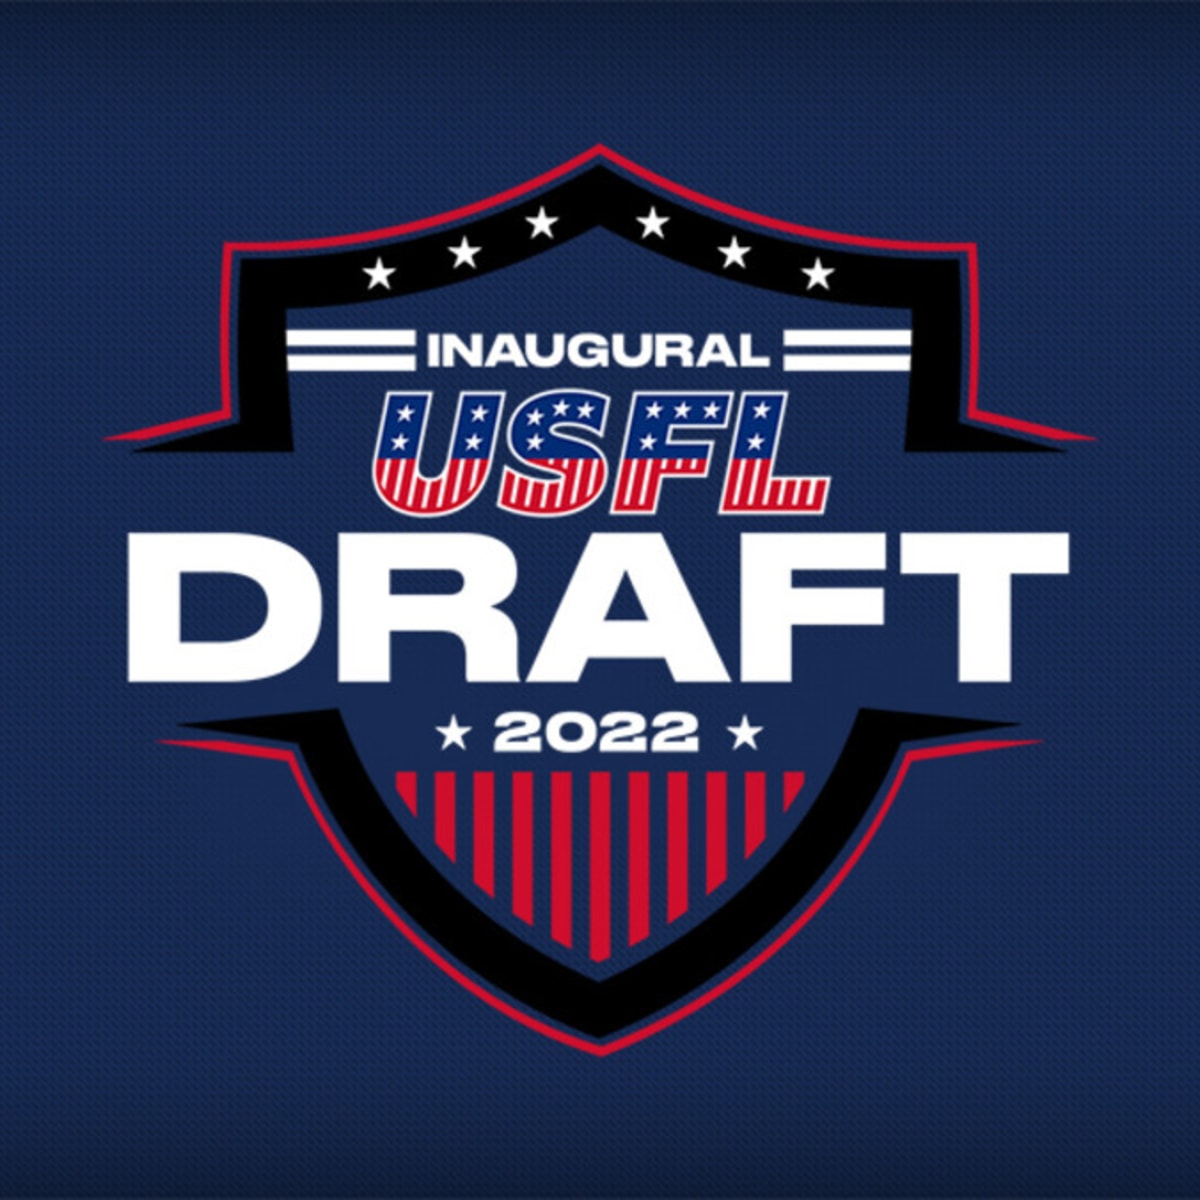 USFL Draft: Draft Picks, Complete Rosters, Schedule, Draft Order. Guide To USFL  Draft Process - Visit NFL Draft on Sports Illustrated, the latest news  coverage, with rankings for NFL Draft prospects, College